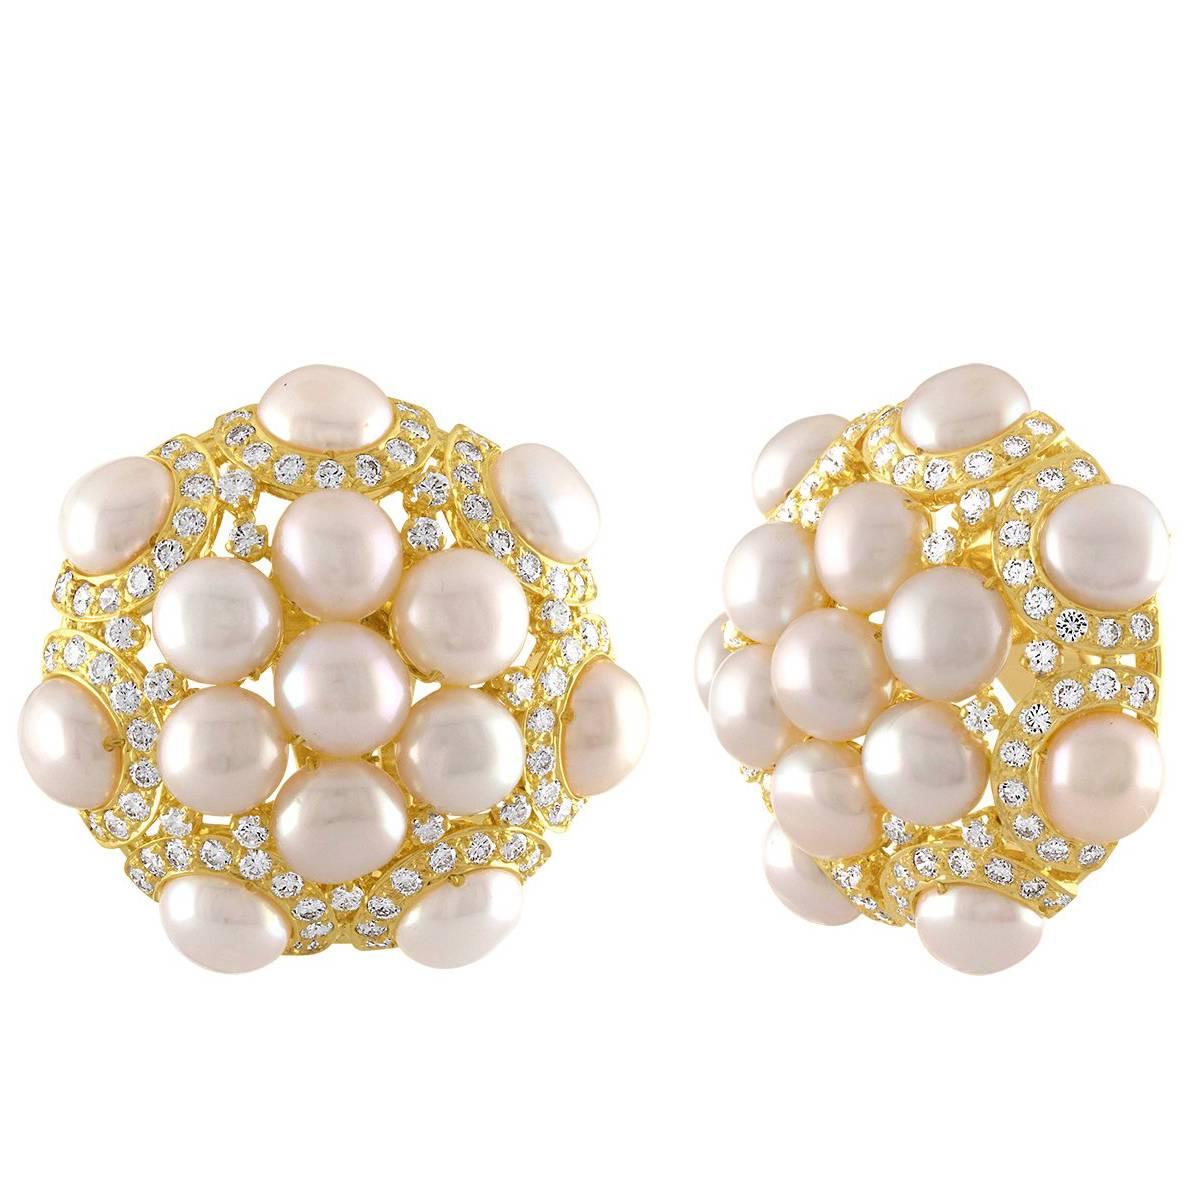 3.00 Carat Diamonds and Pearls Clip-On Gold Button Earrings